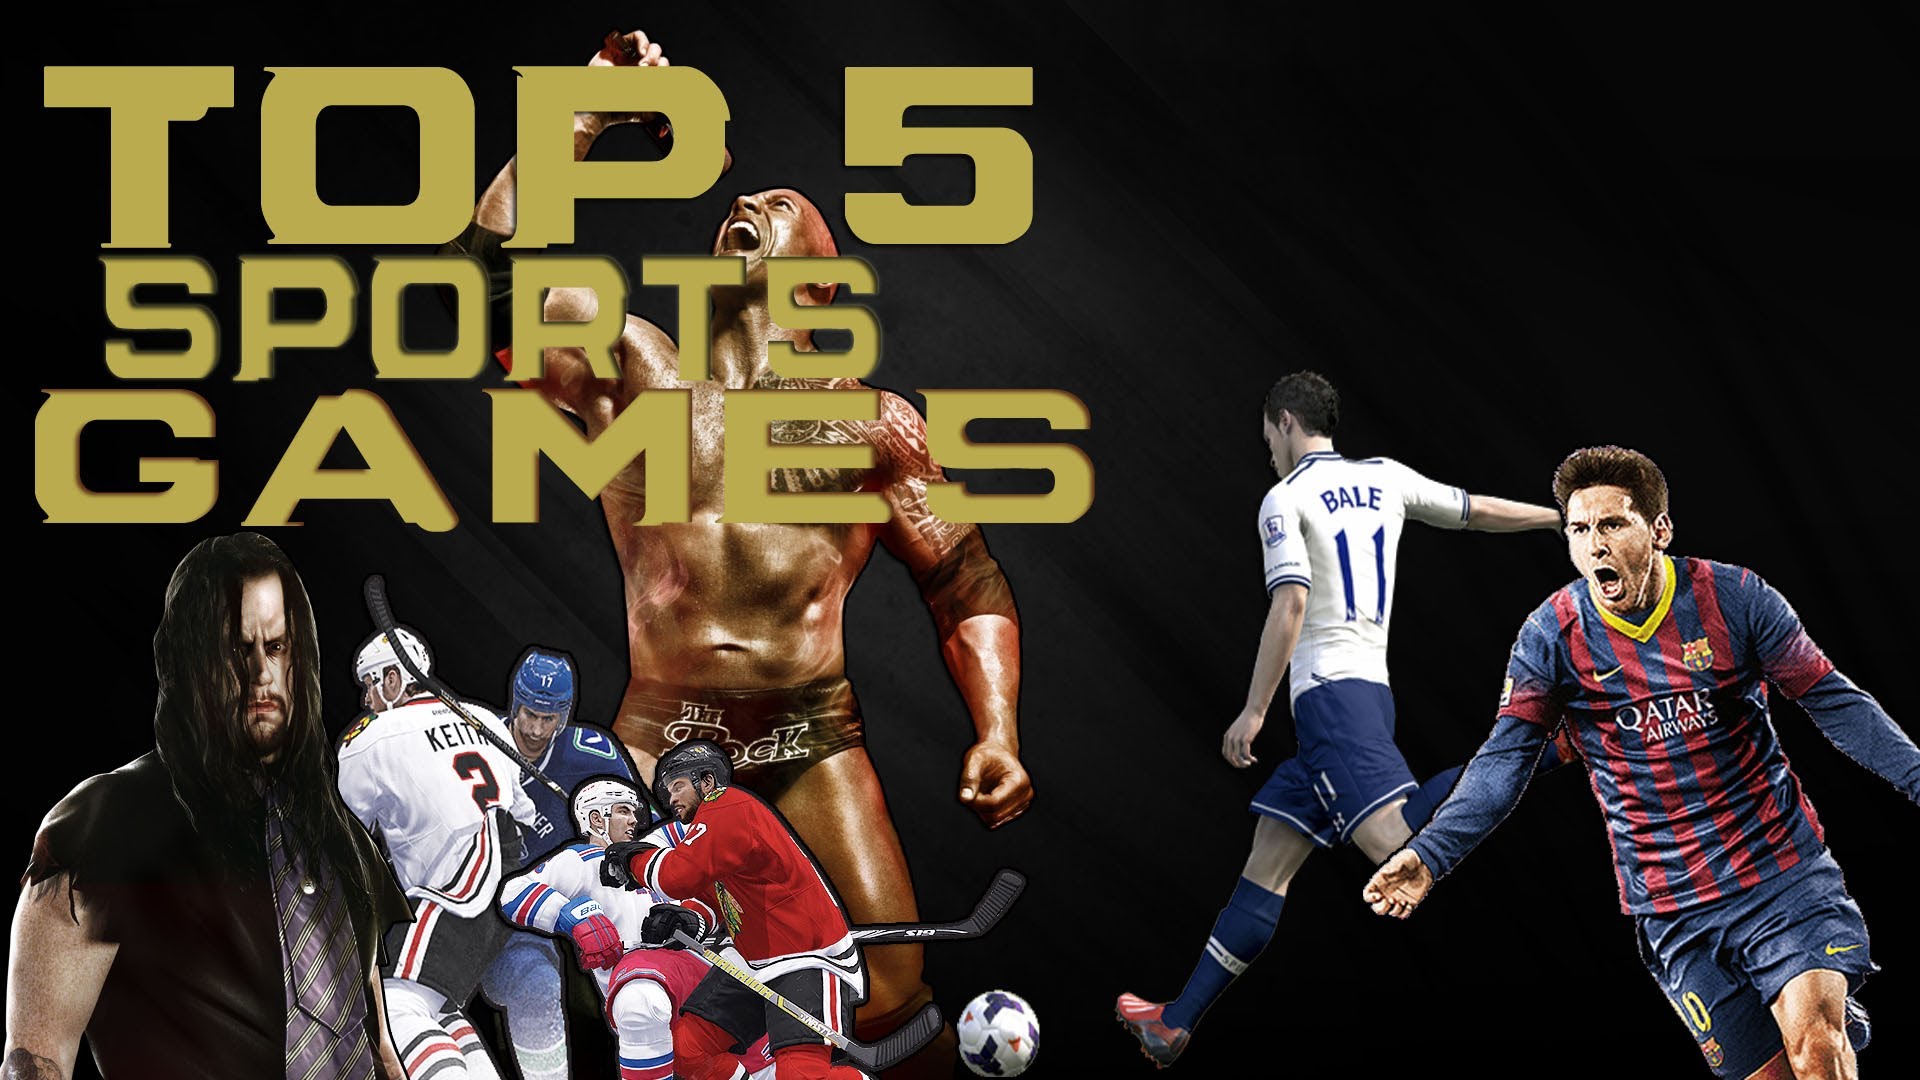 TOP 5 “SPORTS” GAMES